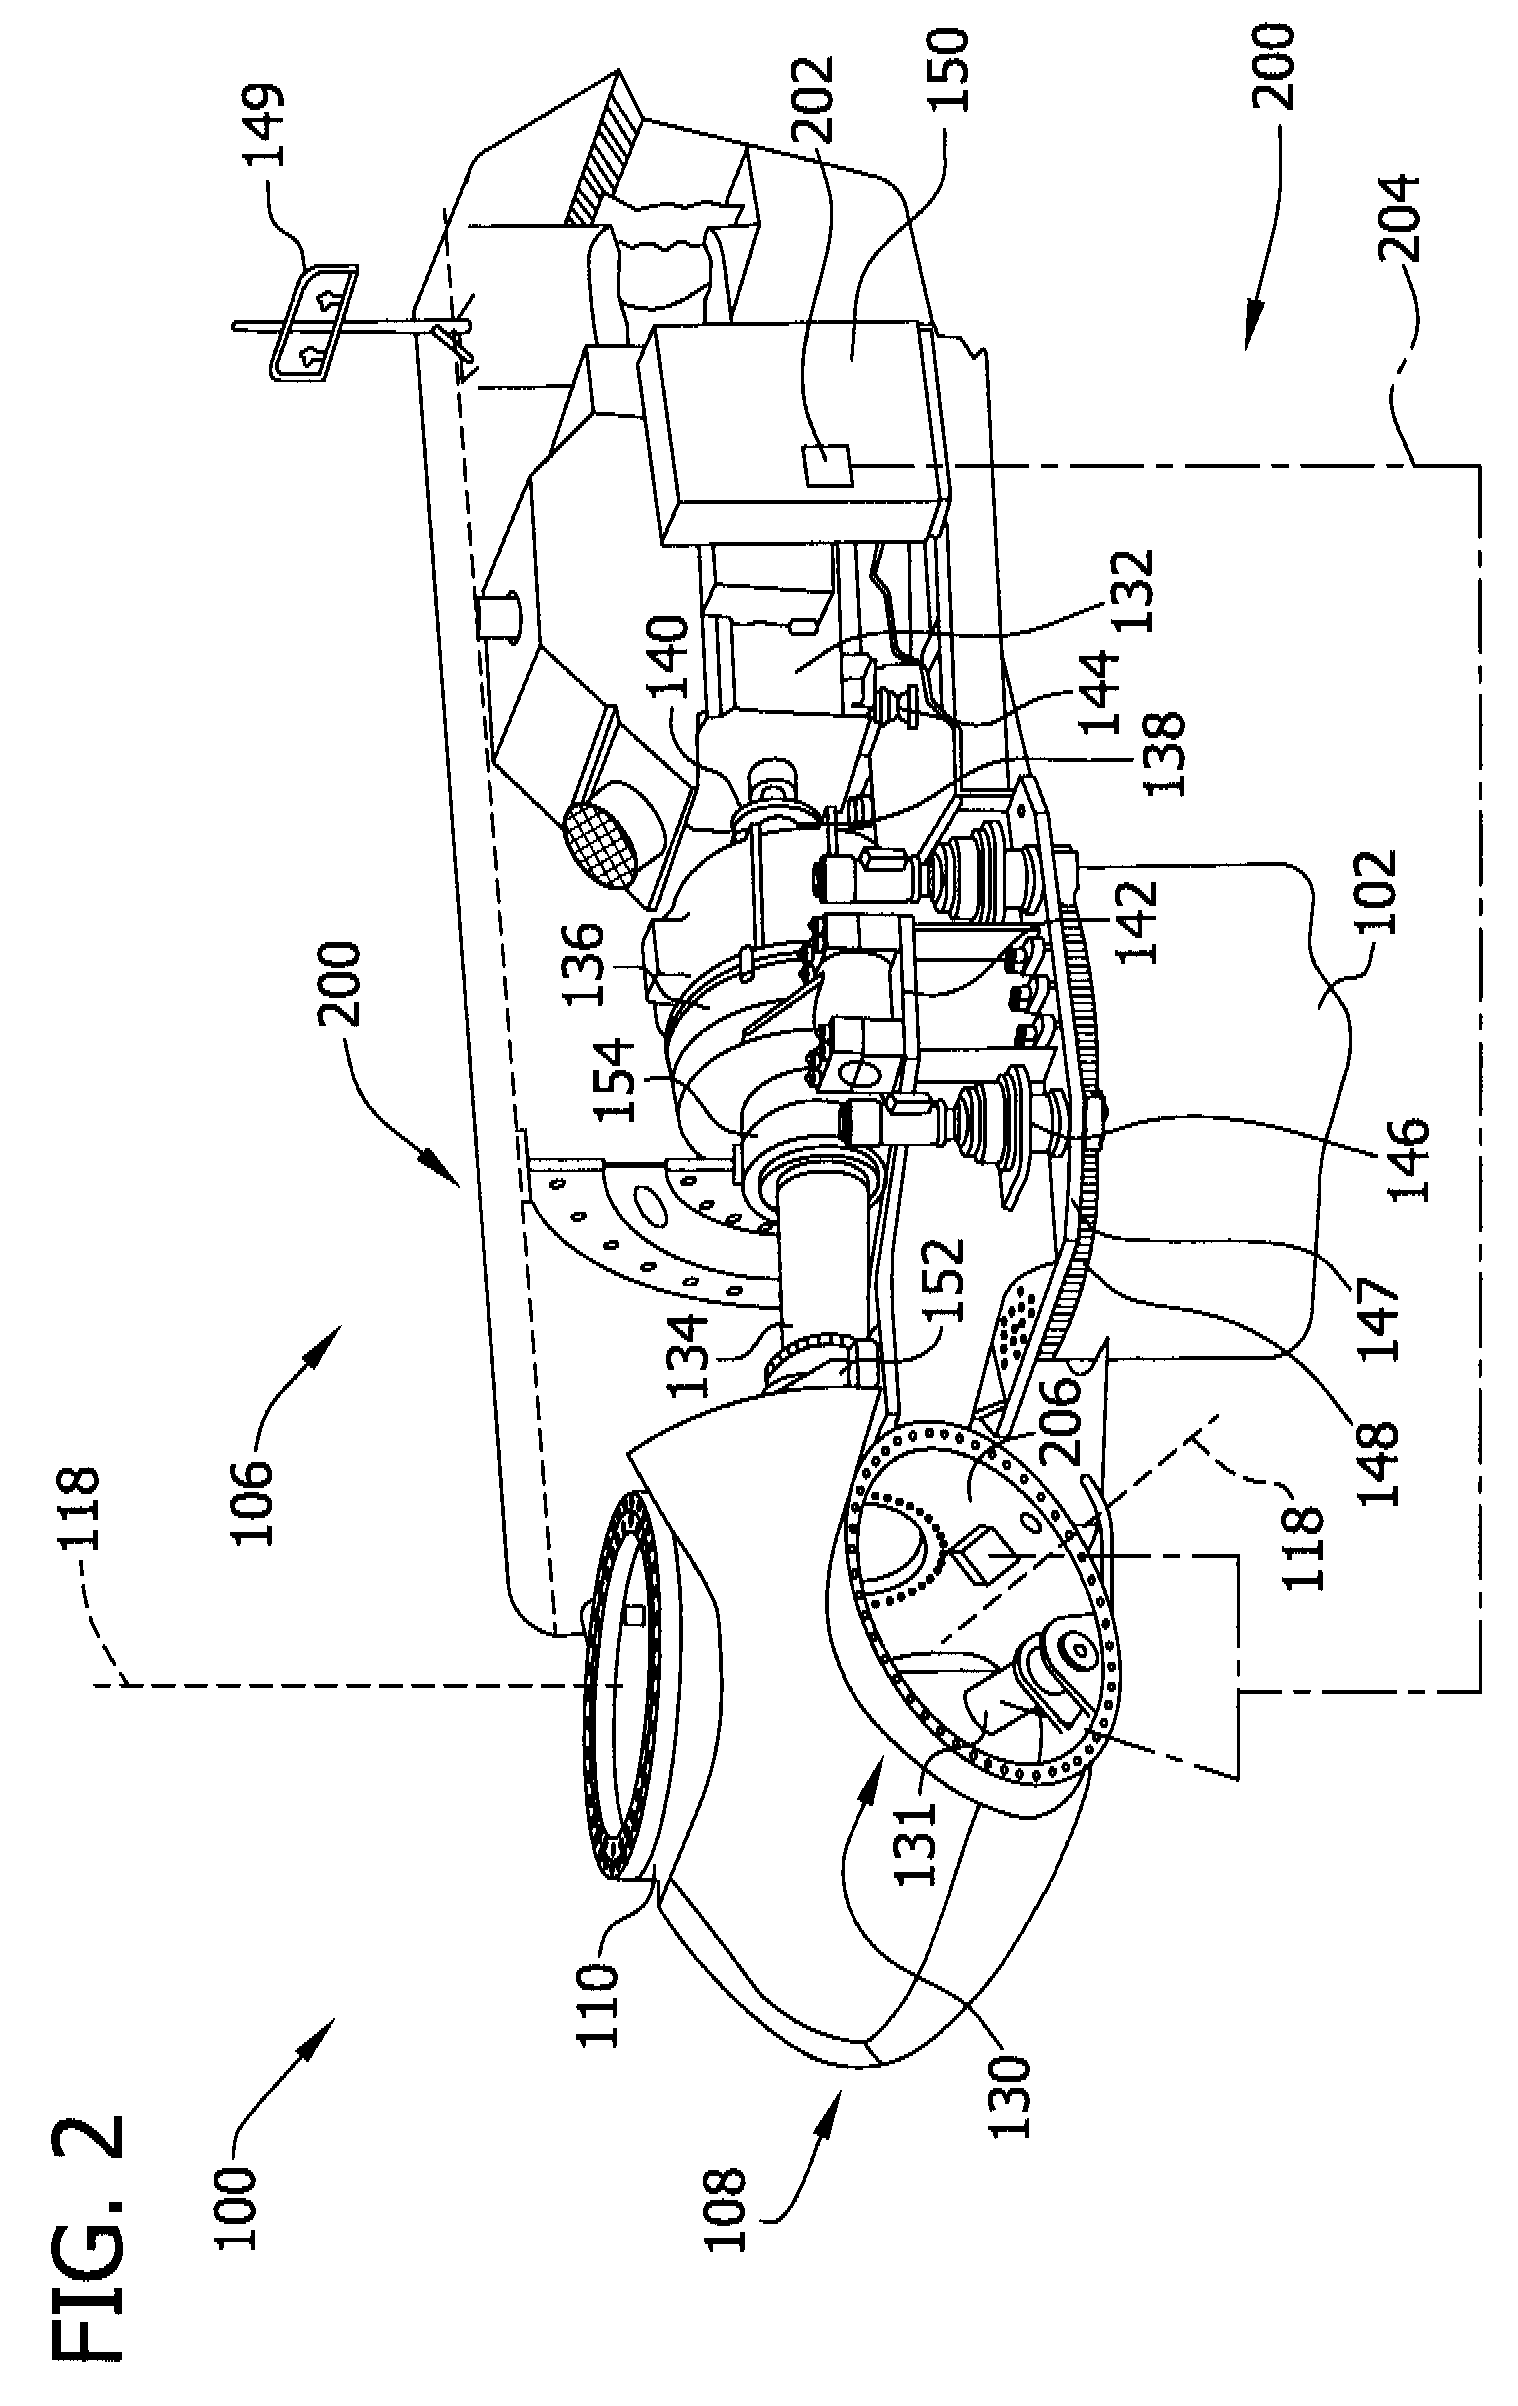 Yaw assembly for a rotatable system and method of assembling the same